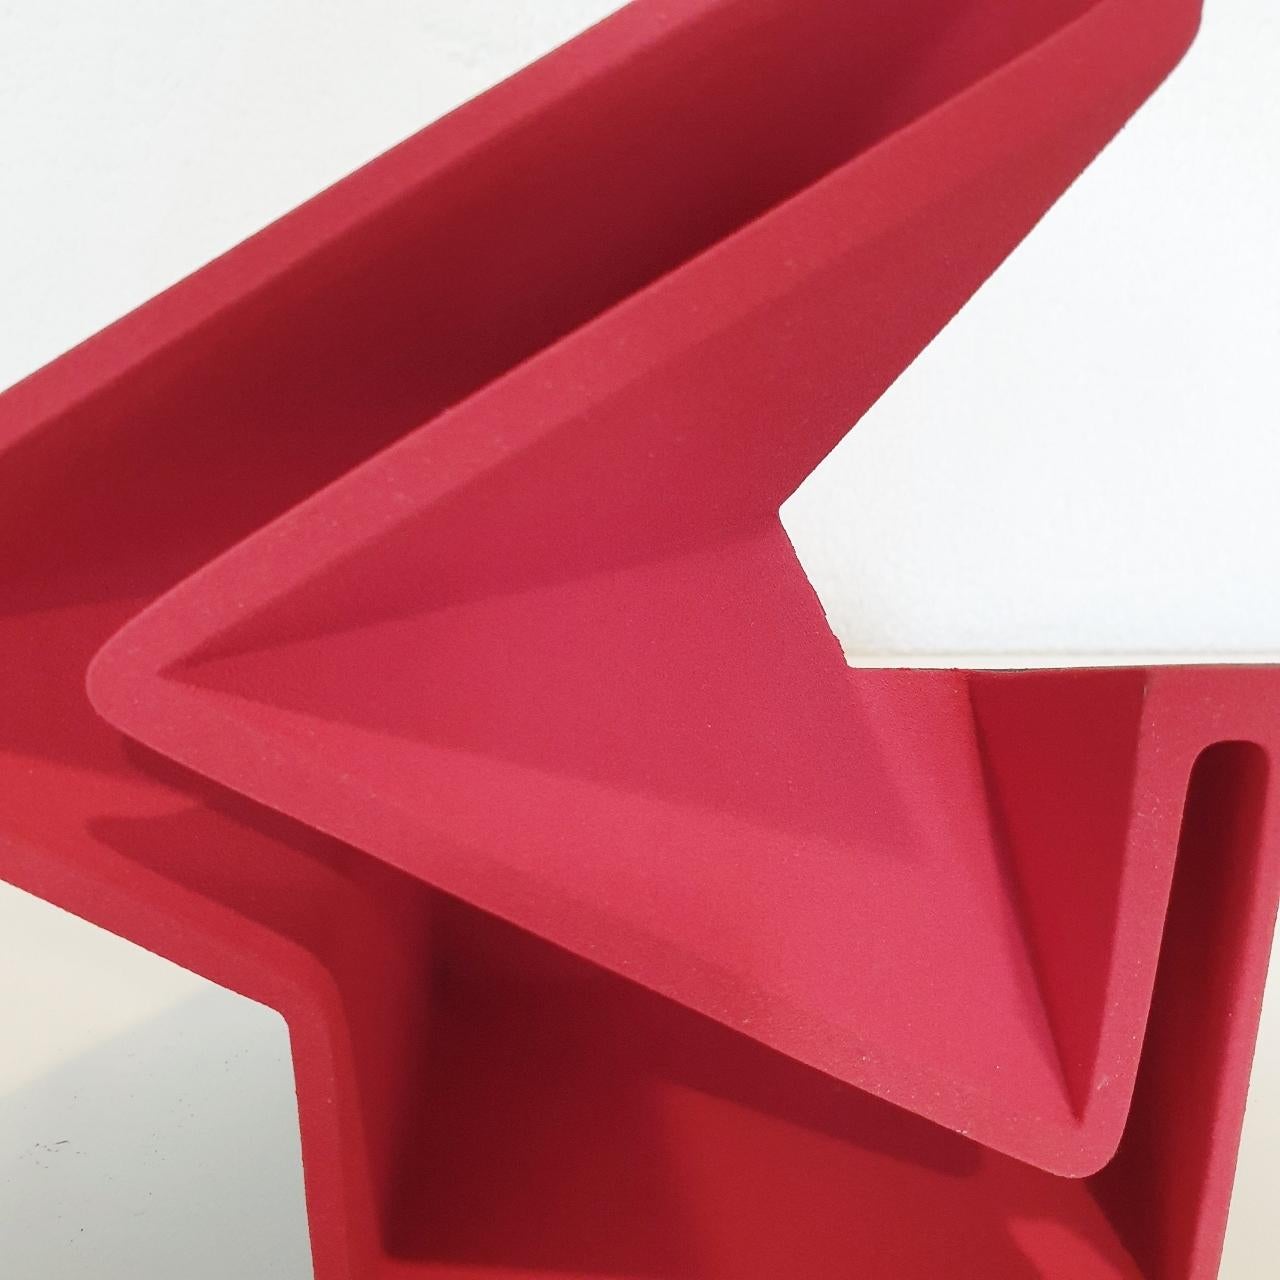 Sculpture SC1503 (red) is a contemporary modern abstract geometric object sculpture by Dutch visual artist Let de Kok. 
This sculpture consists of two ceramic elements and both the red and the black surfaces are textured and rough caused by the